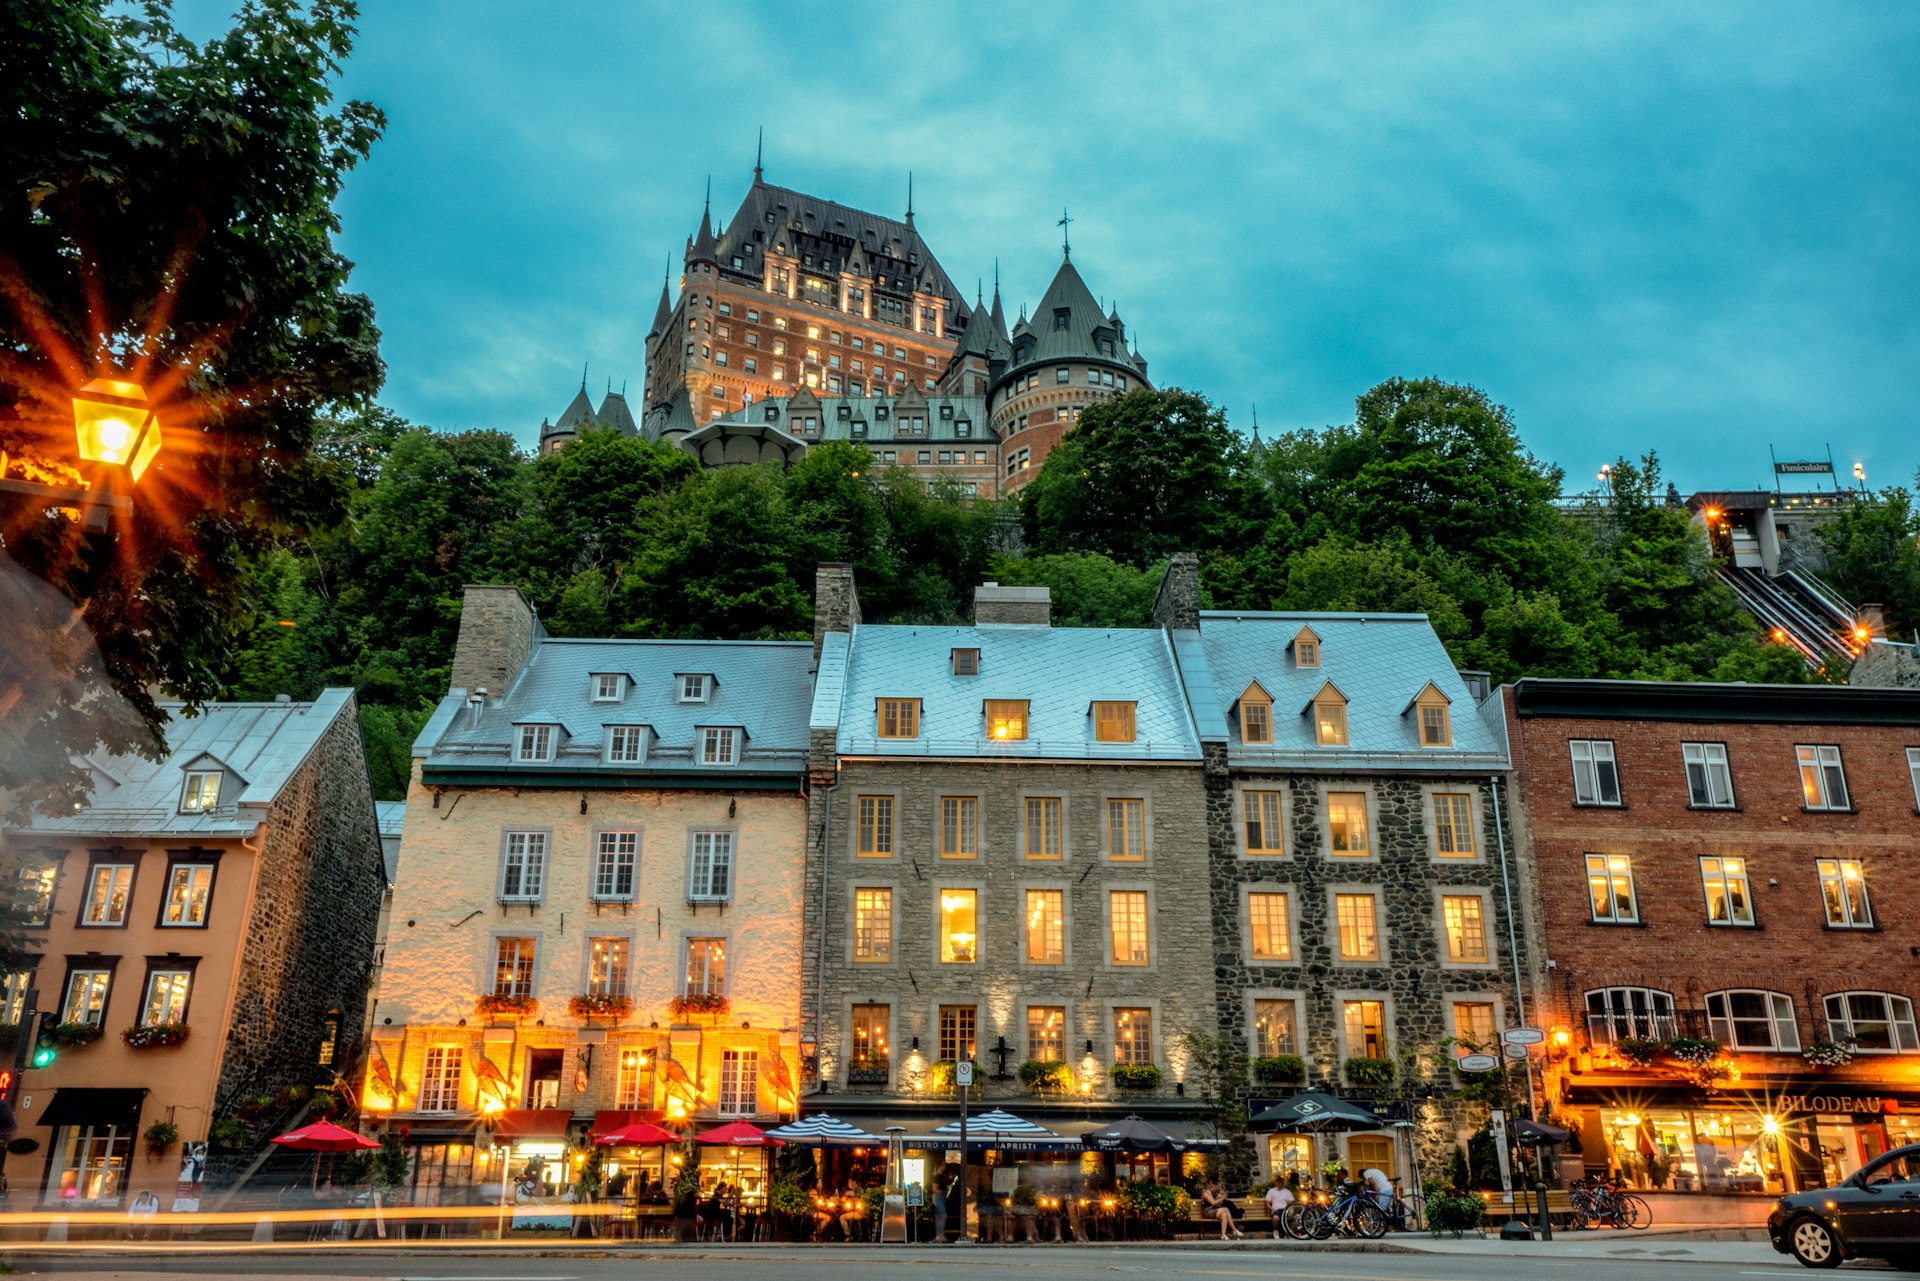 Chateau Frontenac Hotel in Quebec City, Canada. 